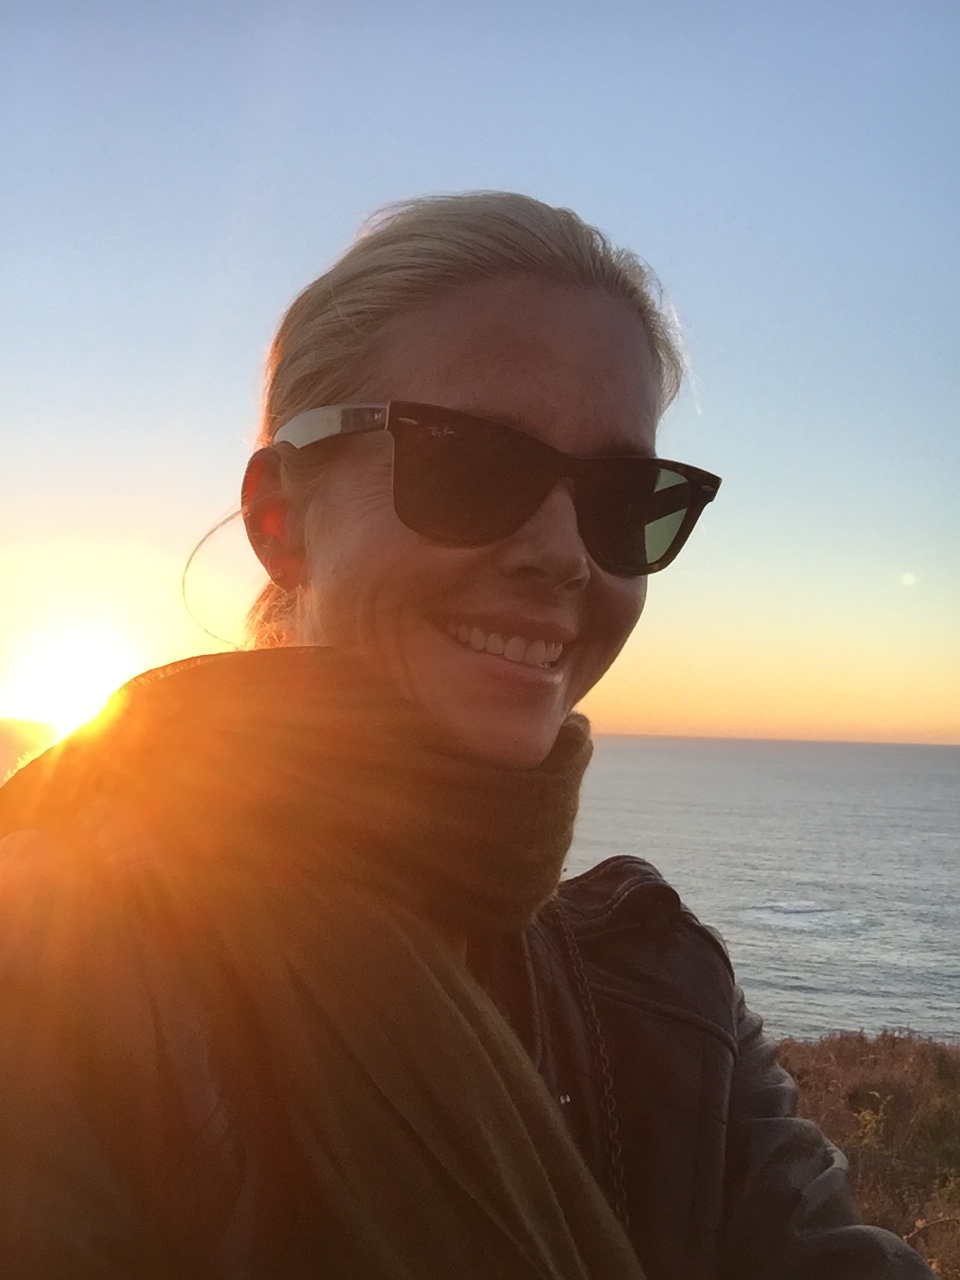 The sun setting over the ocean behind Sophie Lee, who is smiling at the camera 